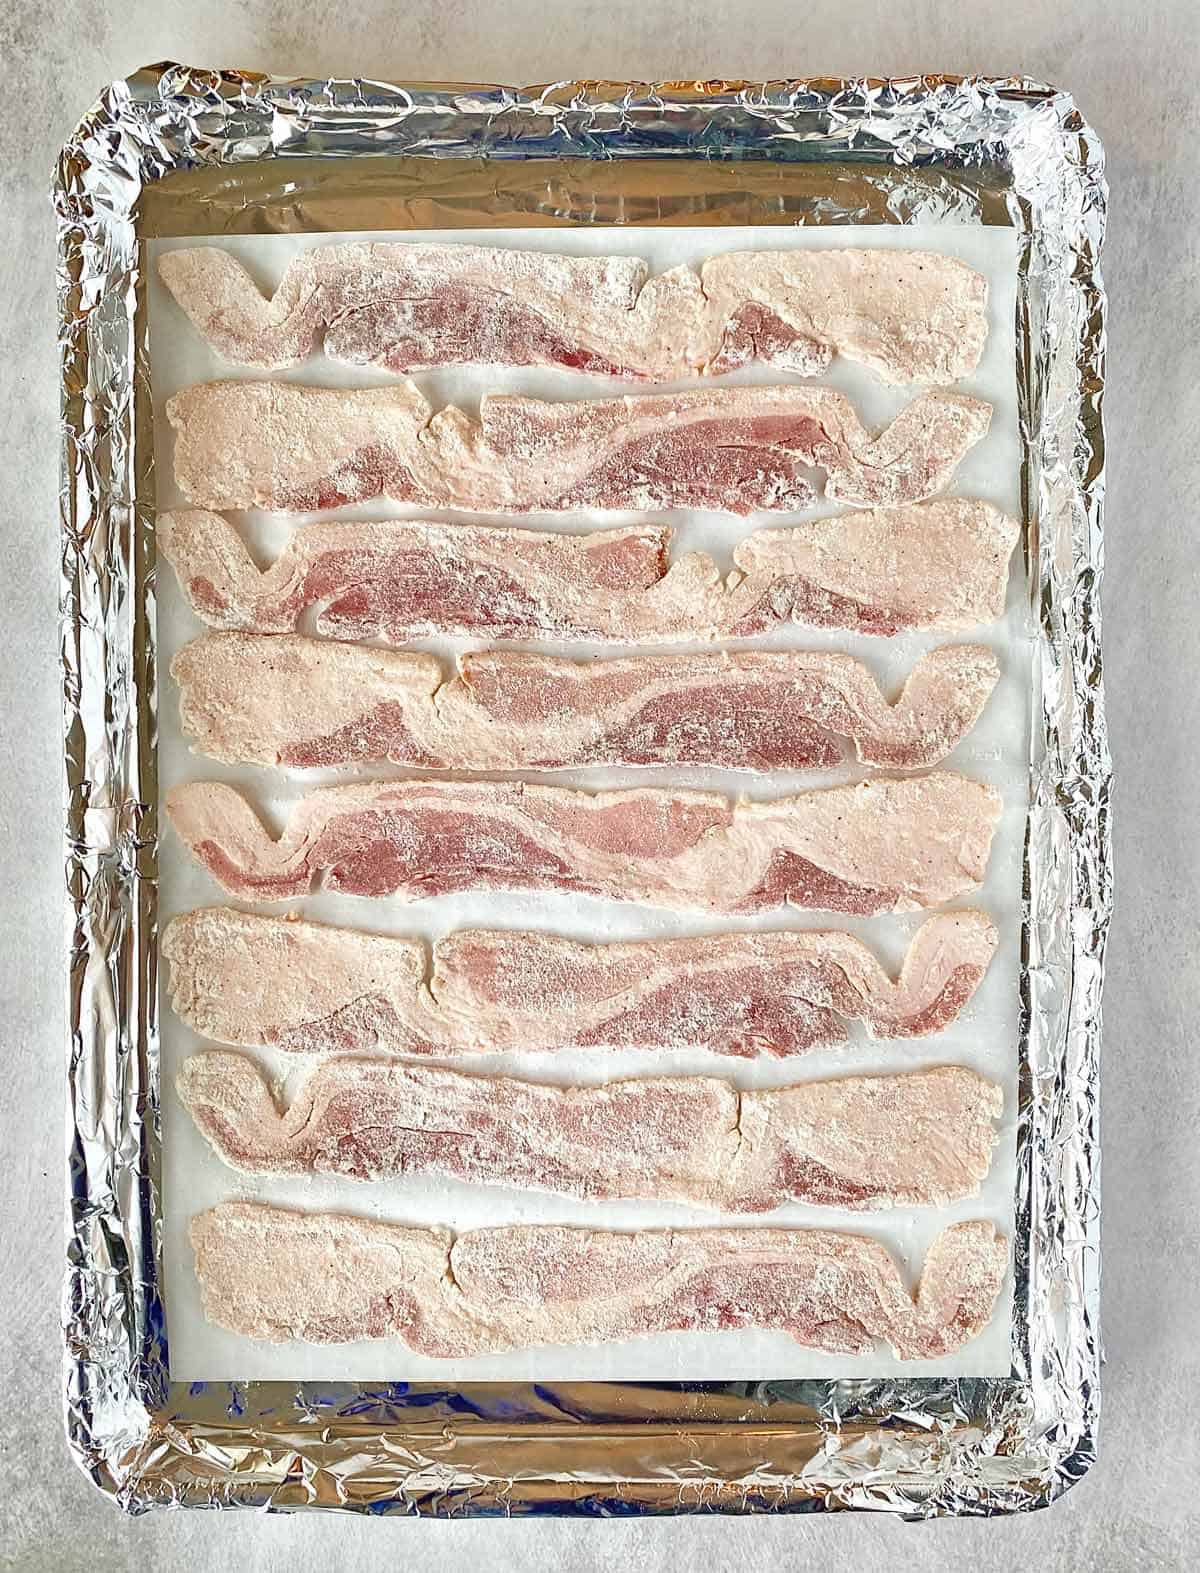 Eight slices of flour coated bacon arranged on a baking sheet.